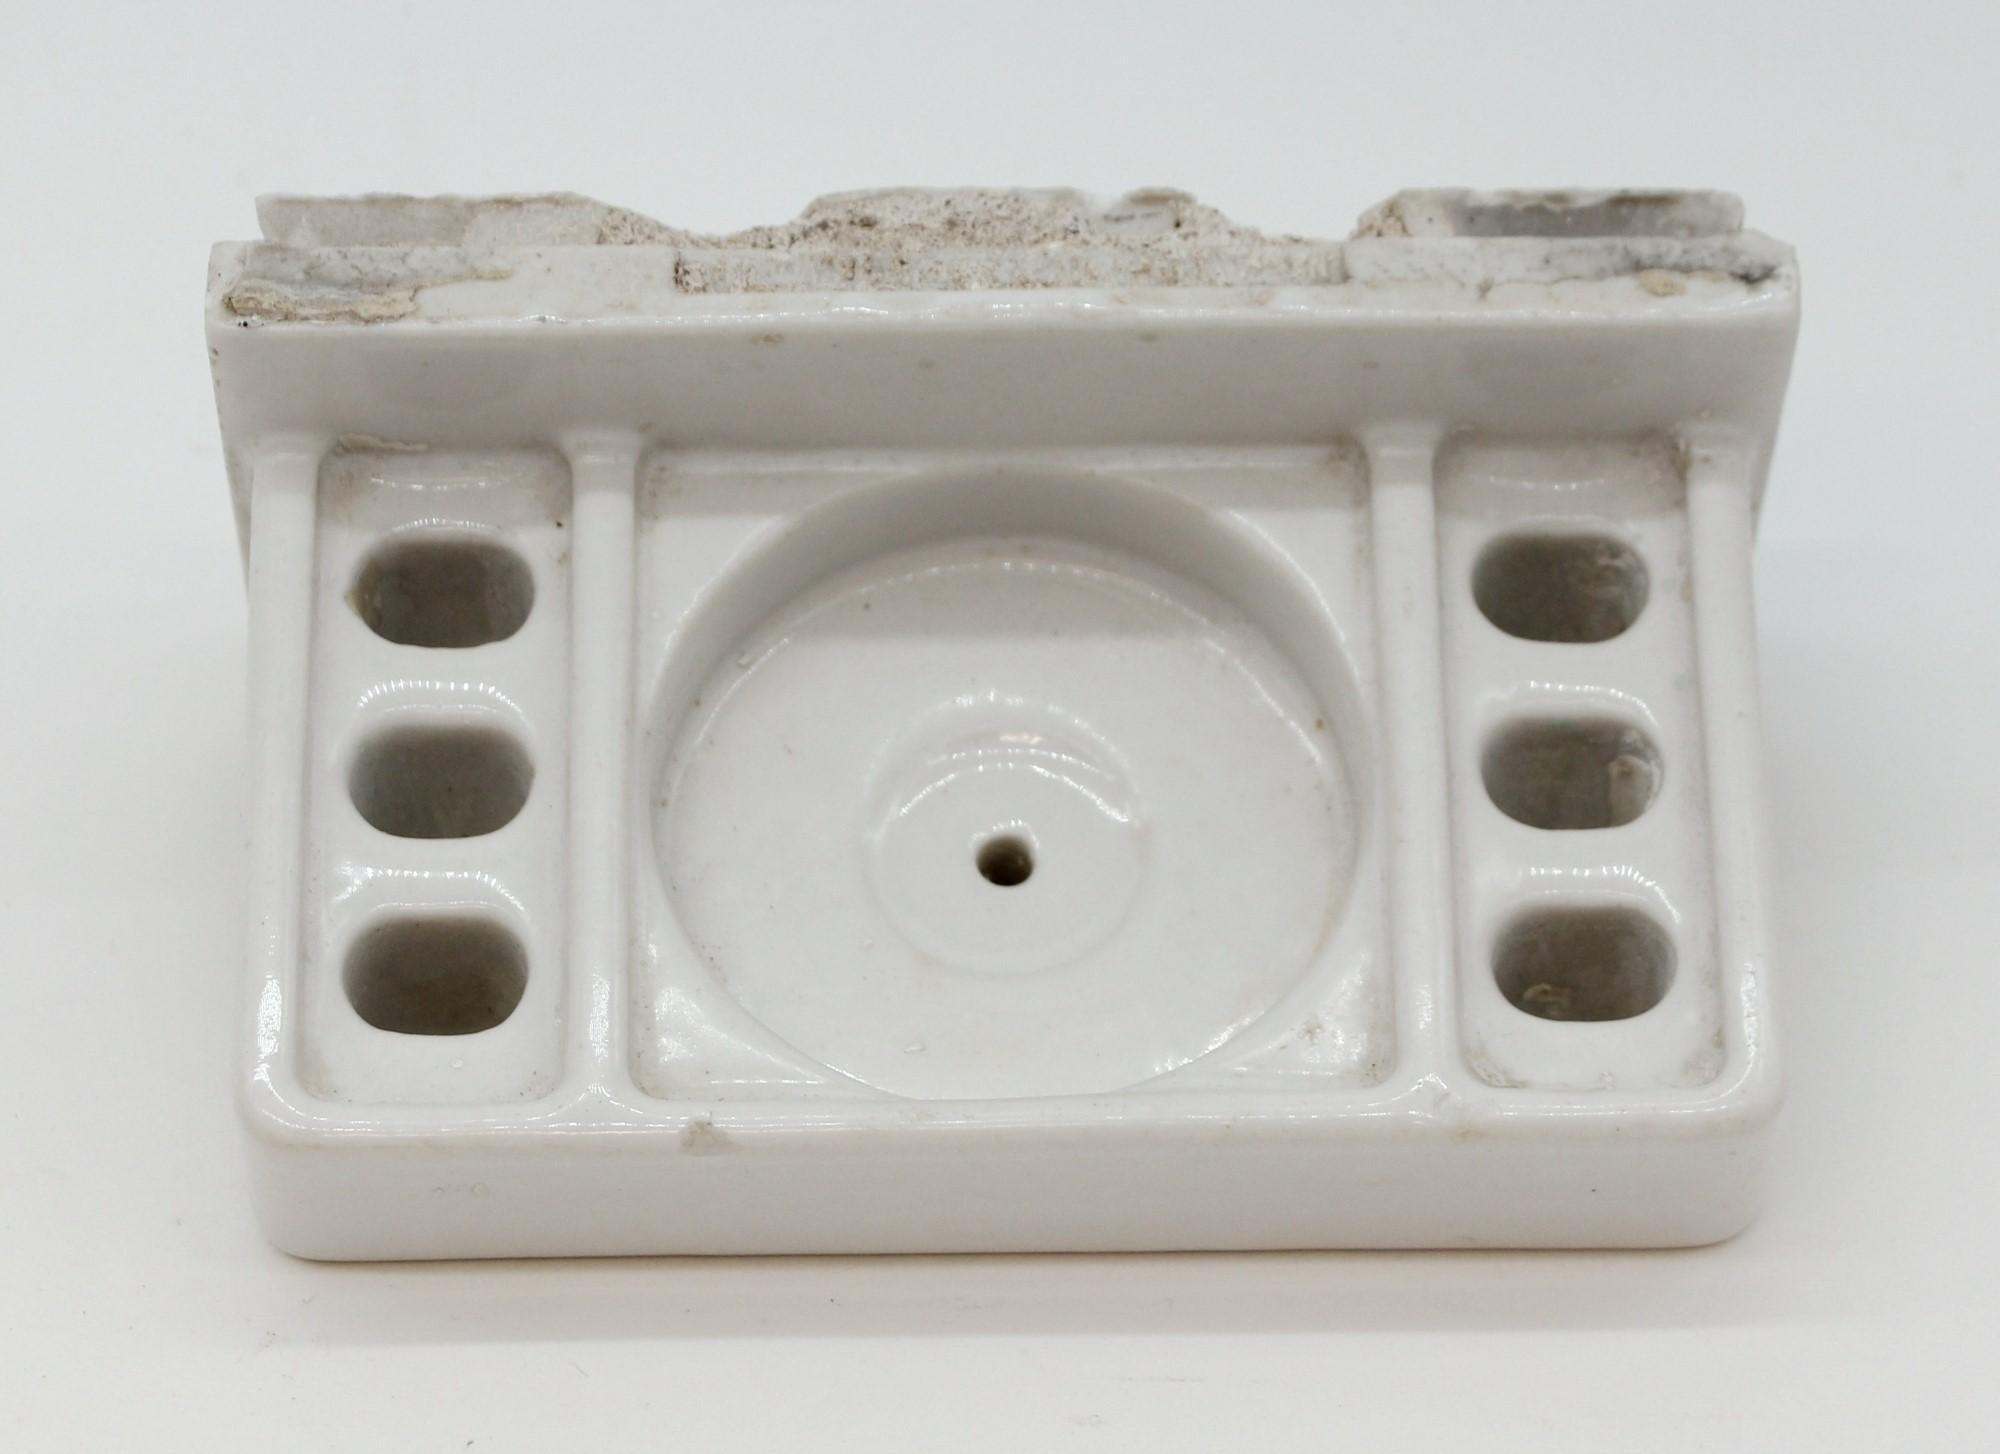 Original NYC 1920s flush mount ceramic toothbrush and cup holder. Recovered from bathrooms that made matching 3 x 6 subway tiles. These were typical in NYC tenement bathrooms where white 3 x 6 ceramic 